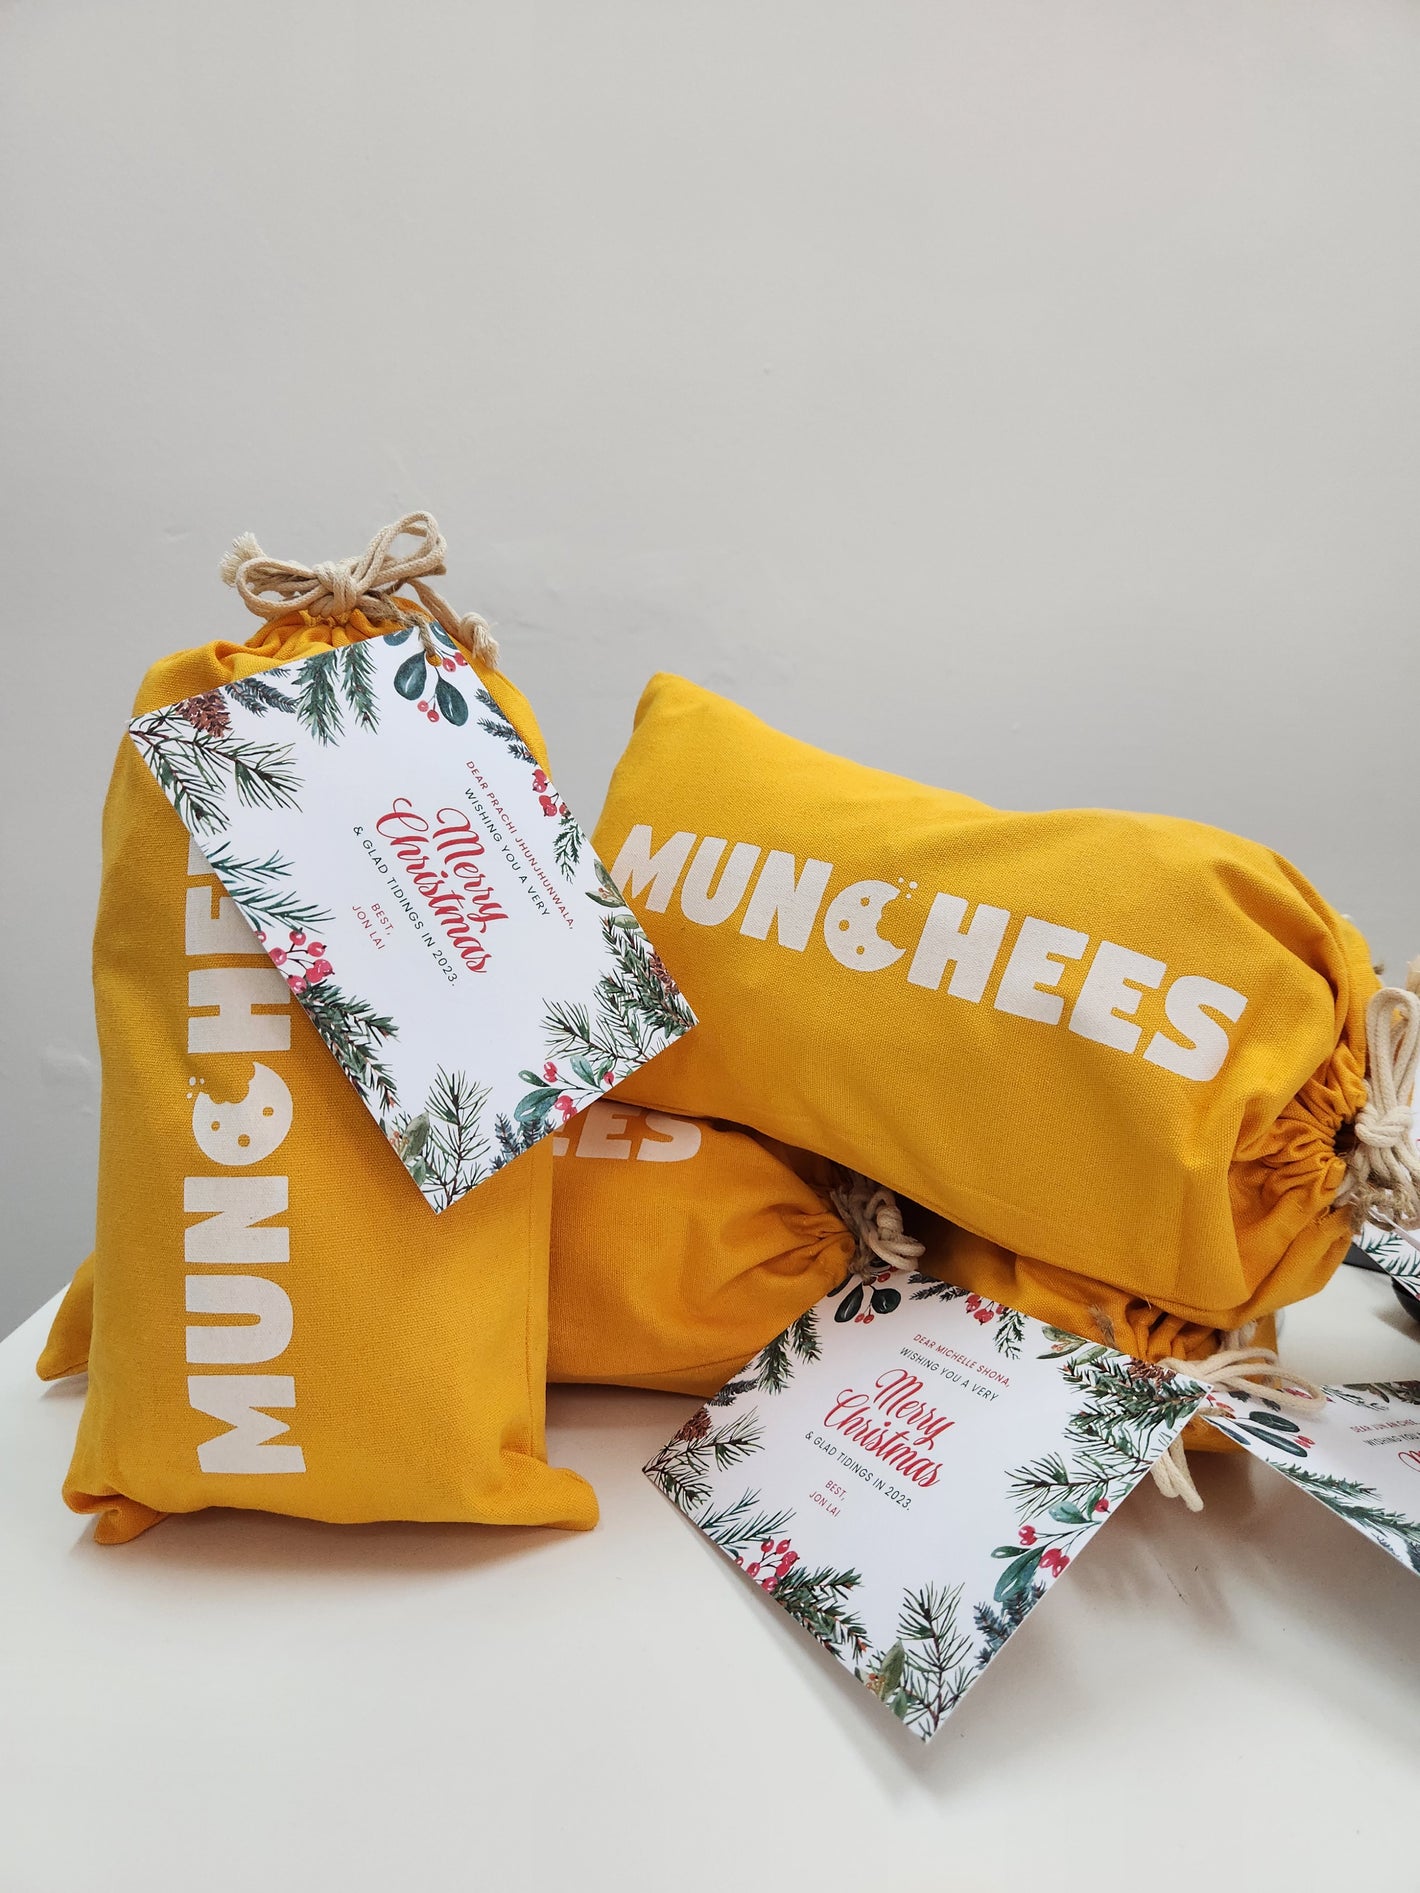 MUNCHEES Reusable Christmas themed snack pouches for Gibson Dunn and Crutcher